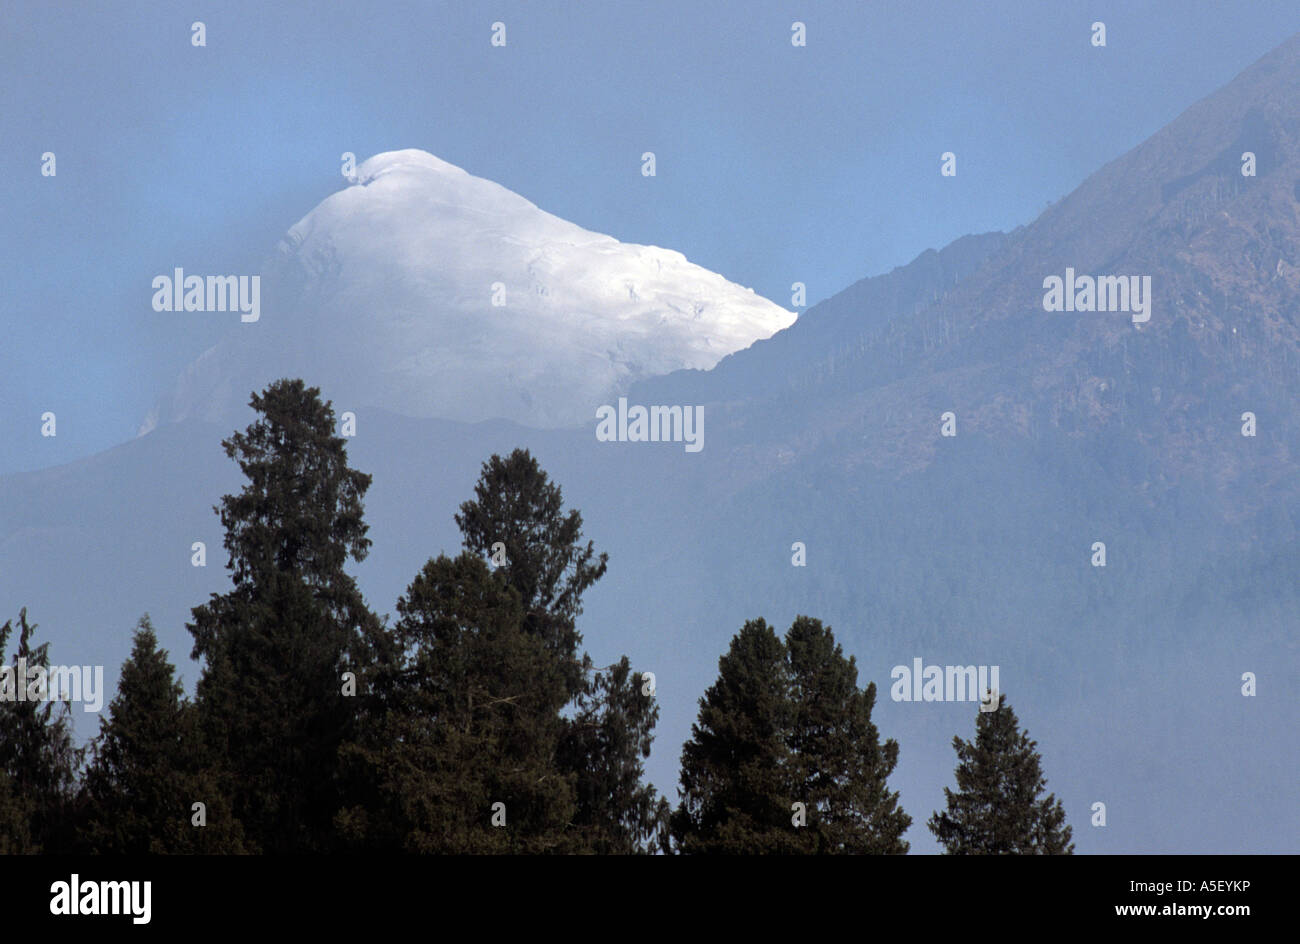 A view of the Himalayan mountain ranges in Bhutan Stock Photo